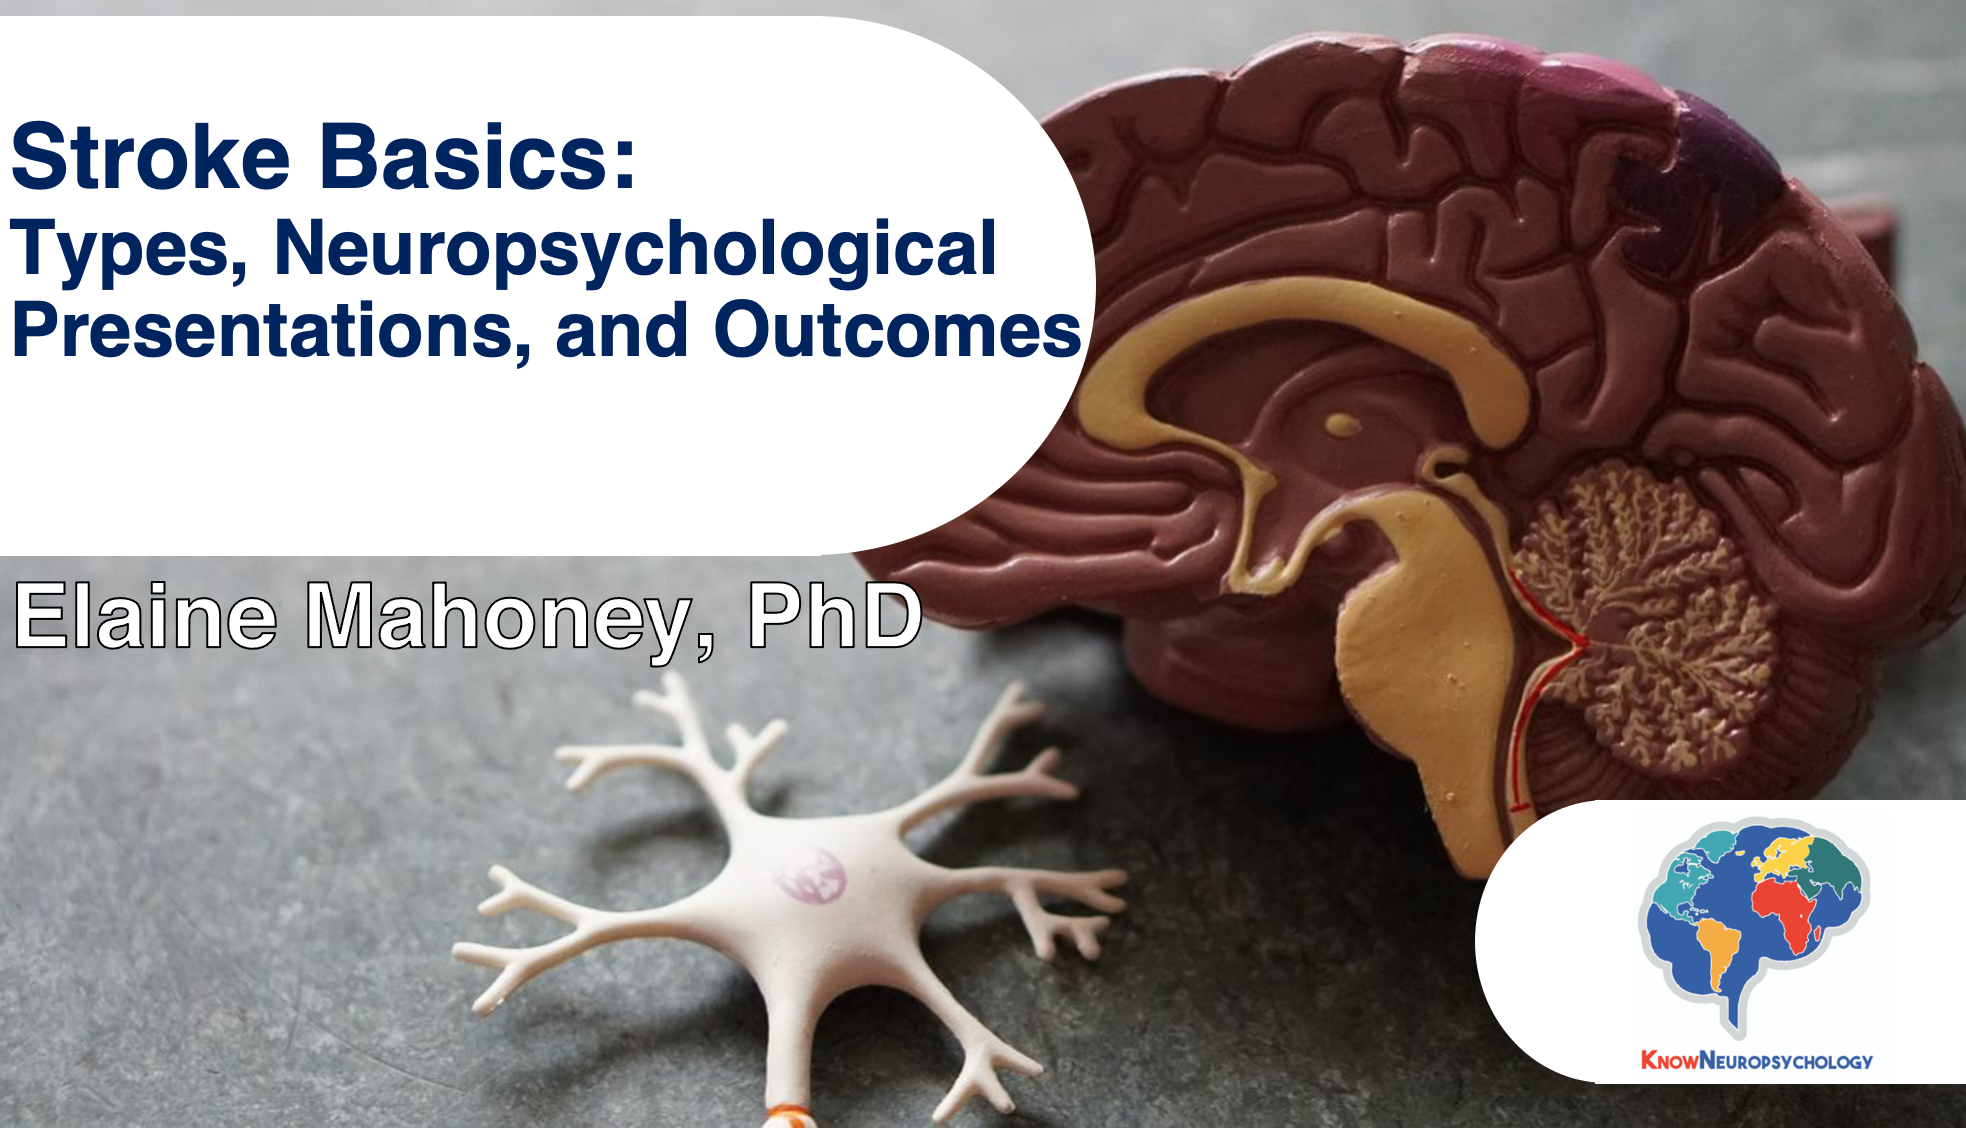 Stroke Basics: Types, Neuropsychological Presentations, and Outcomes with Dr. Elaine Mahoney